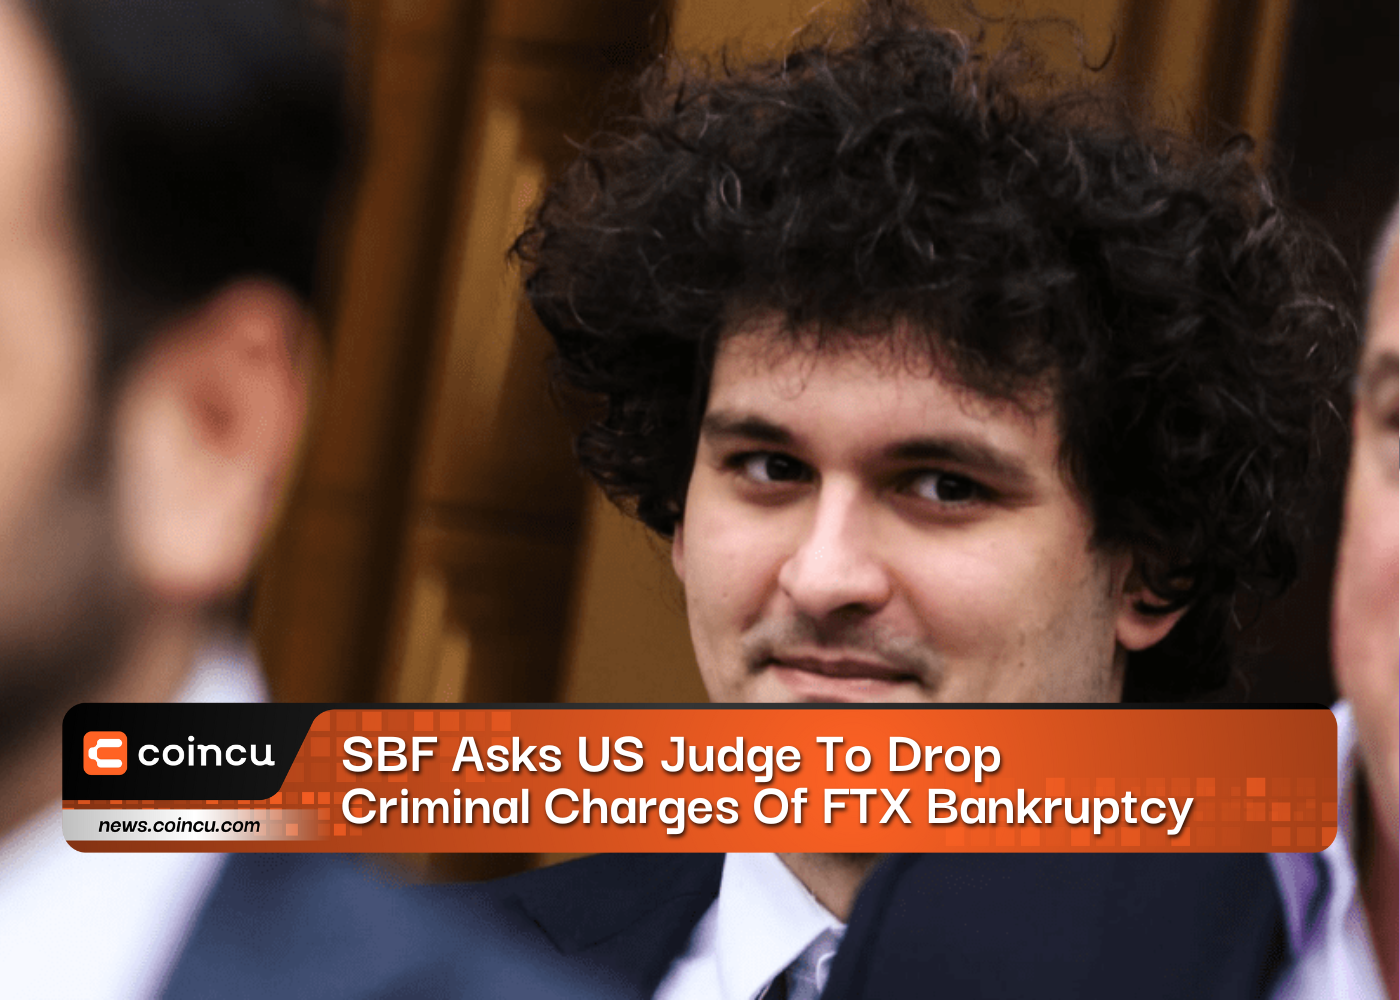 SBF Asks US Judge To Drop Criminal Charges Of FTX Bankruptcy